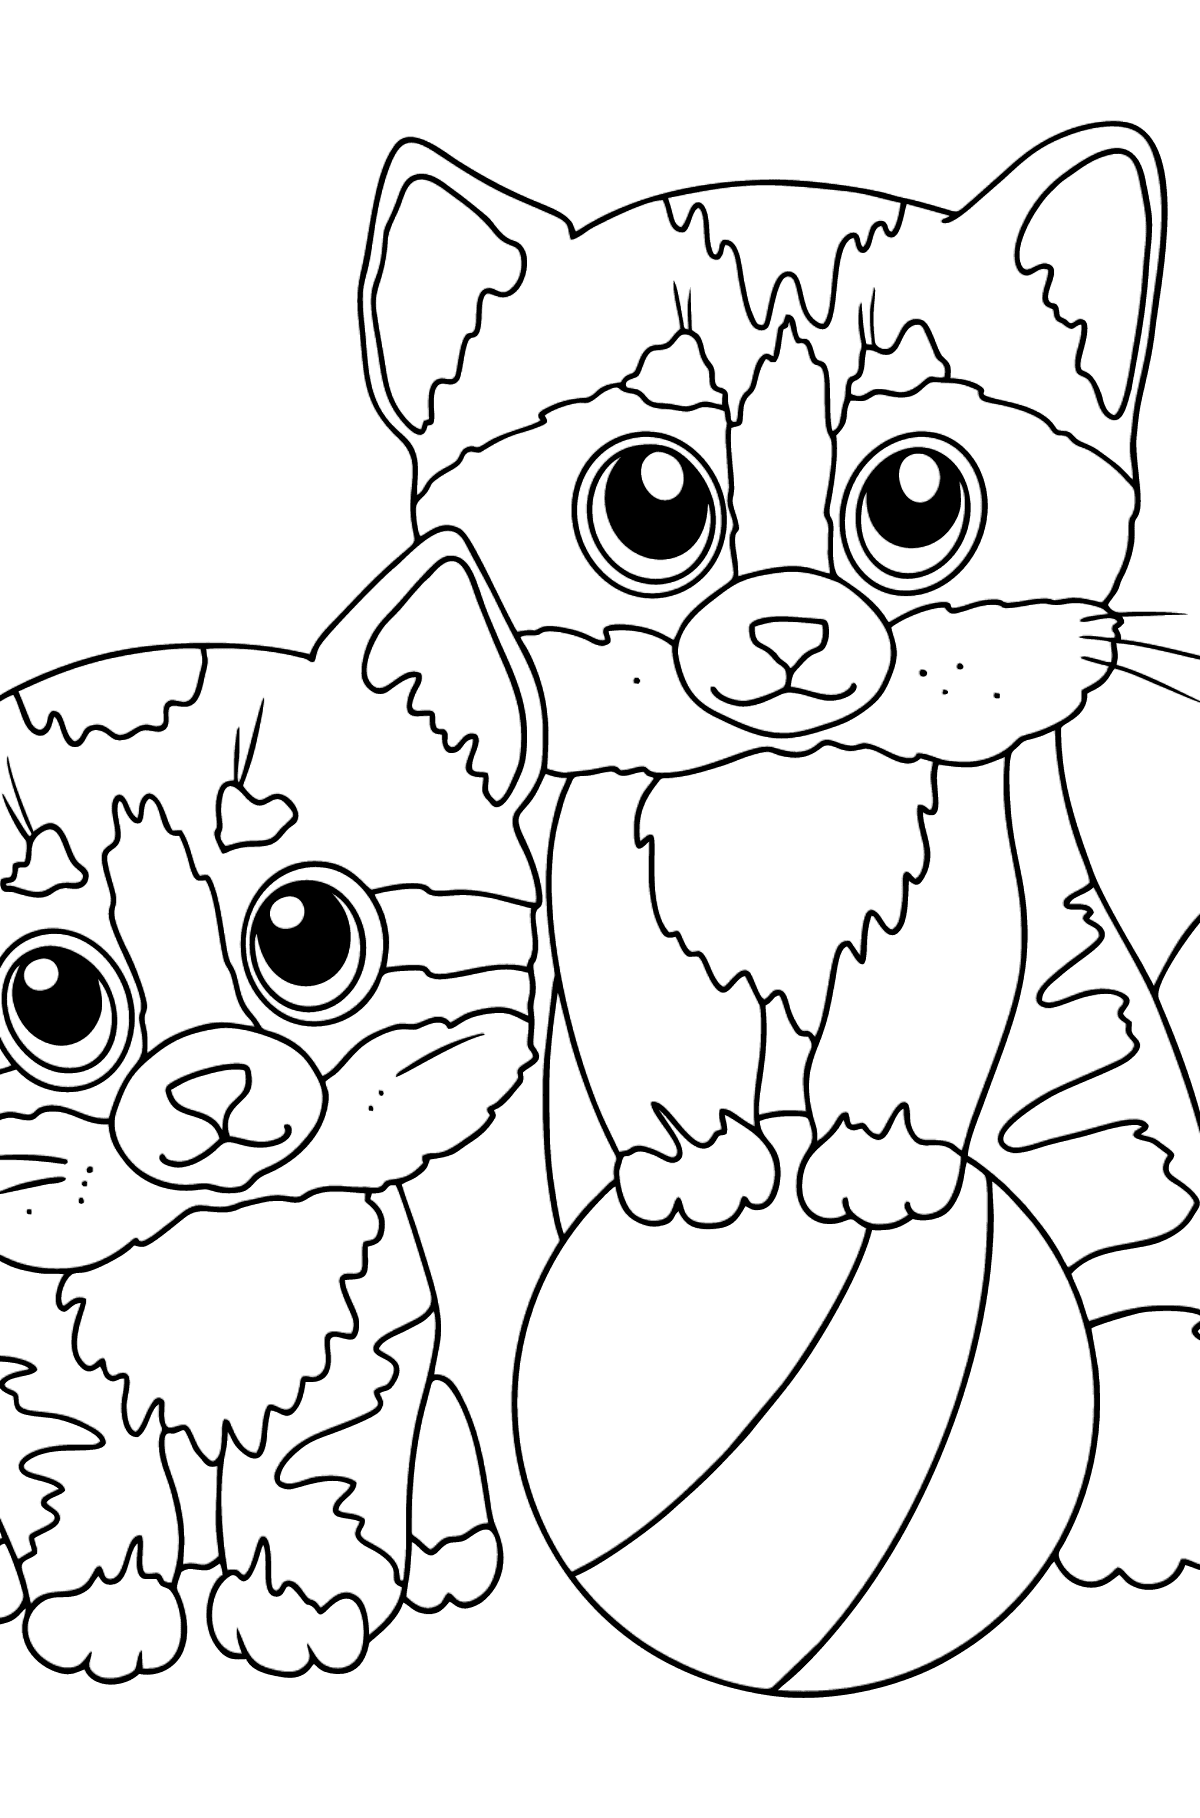 Kittens are Playing coloring page ♥ Online and Print for Free!